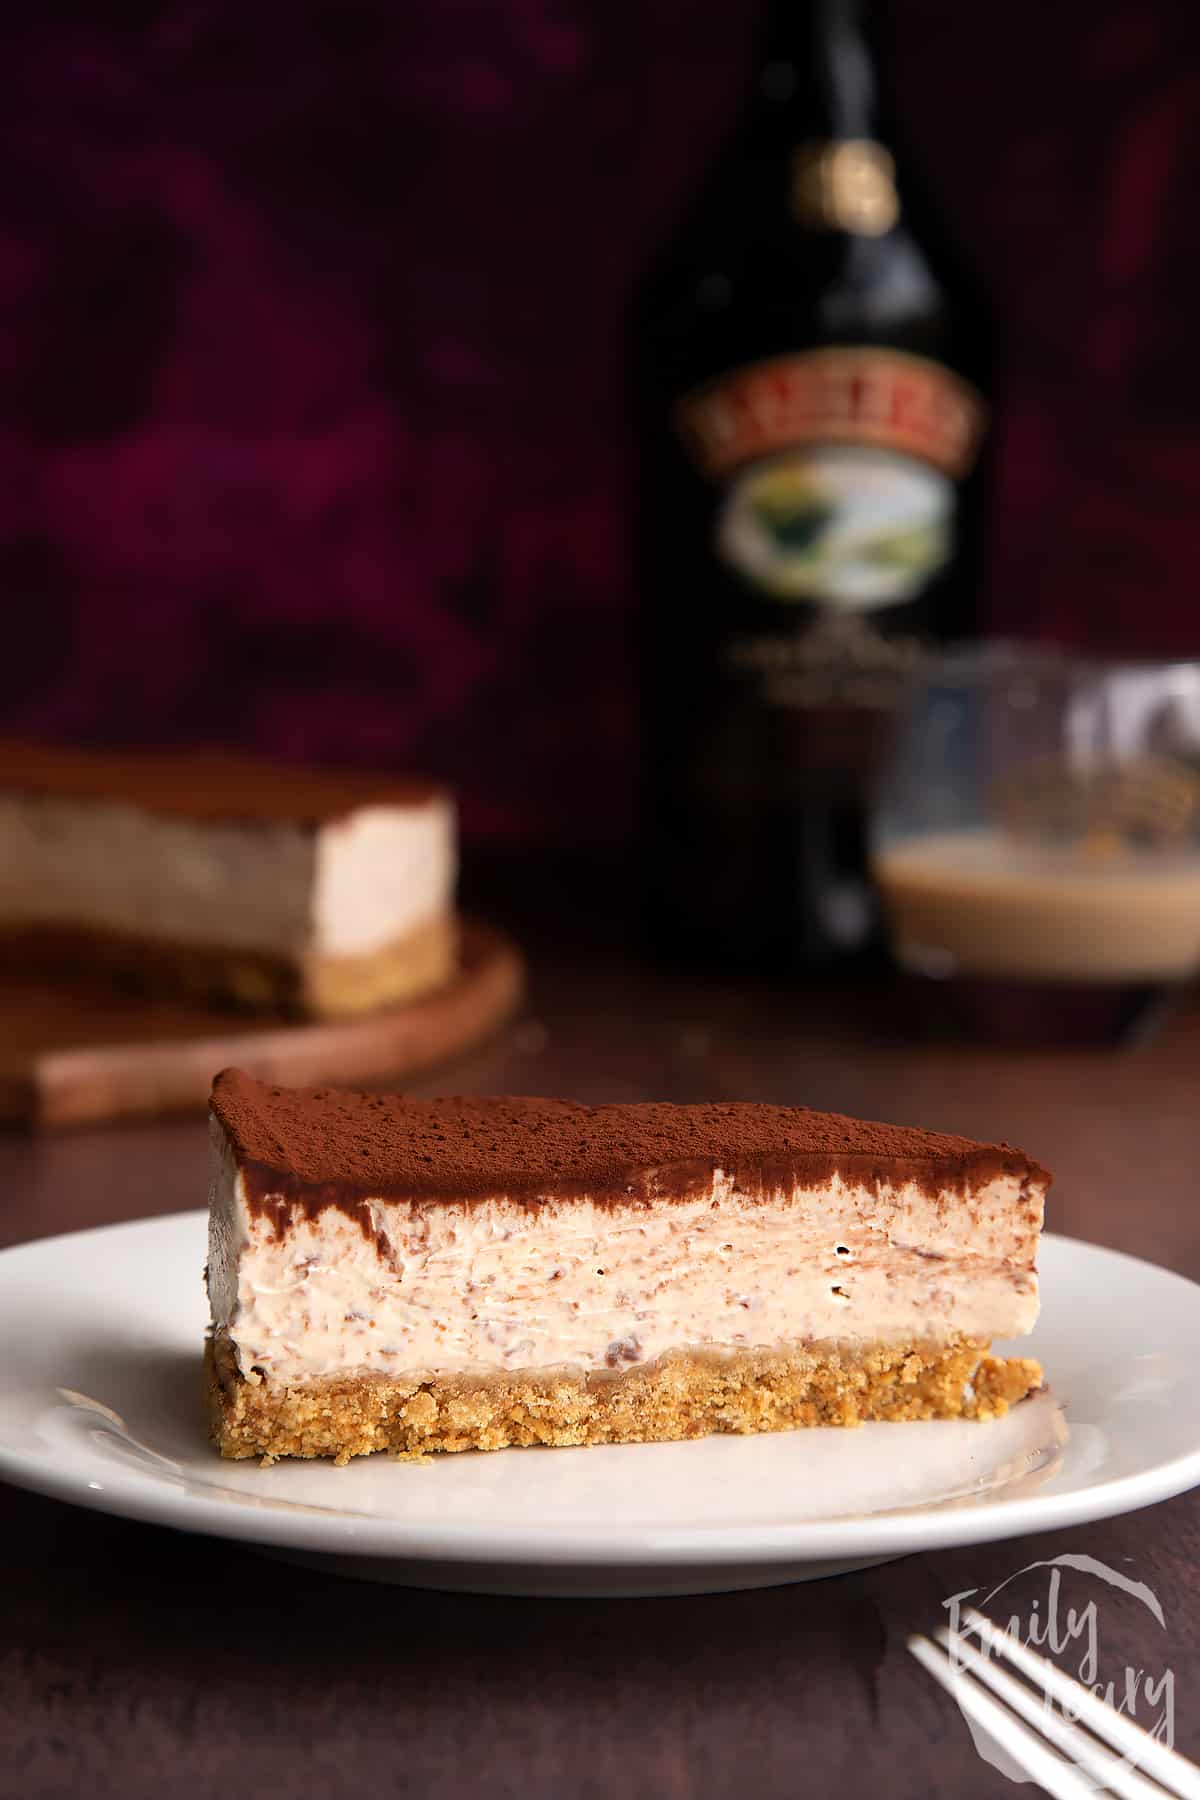 Slice of Baileys cheesecake topped with cocoa on a white plate. More cheesecake and a bottle of Baileys is in the background.